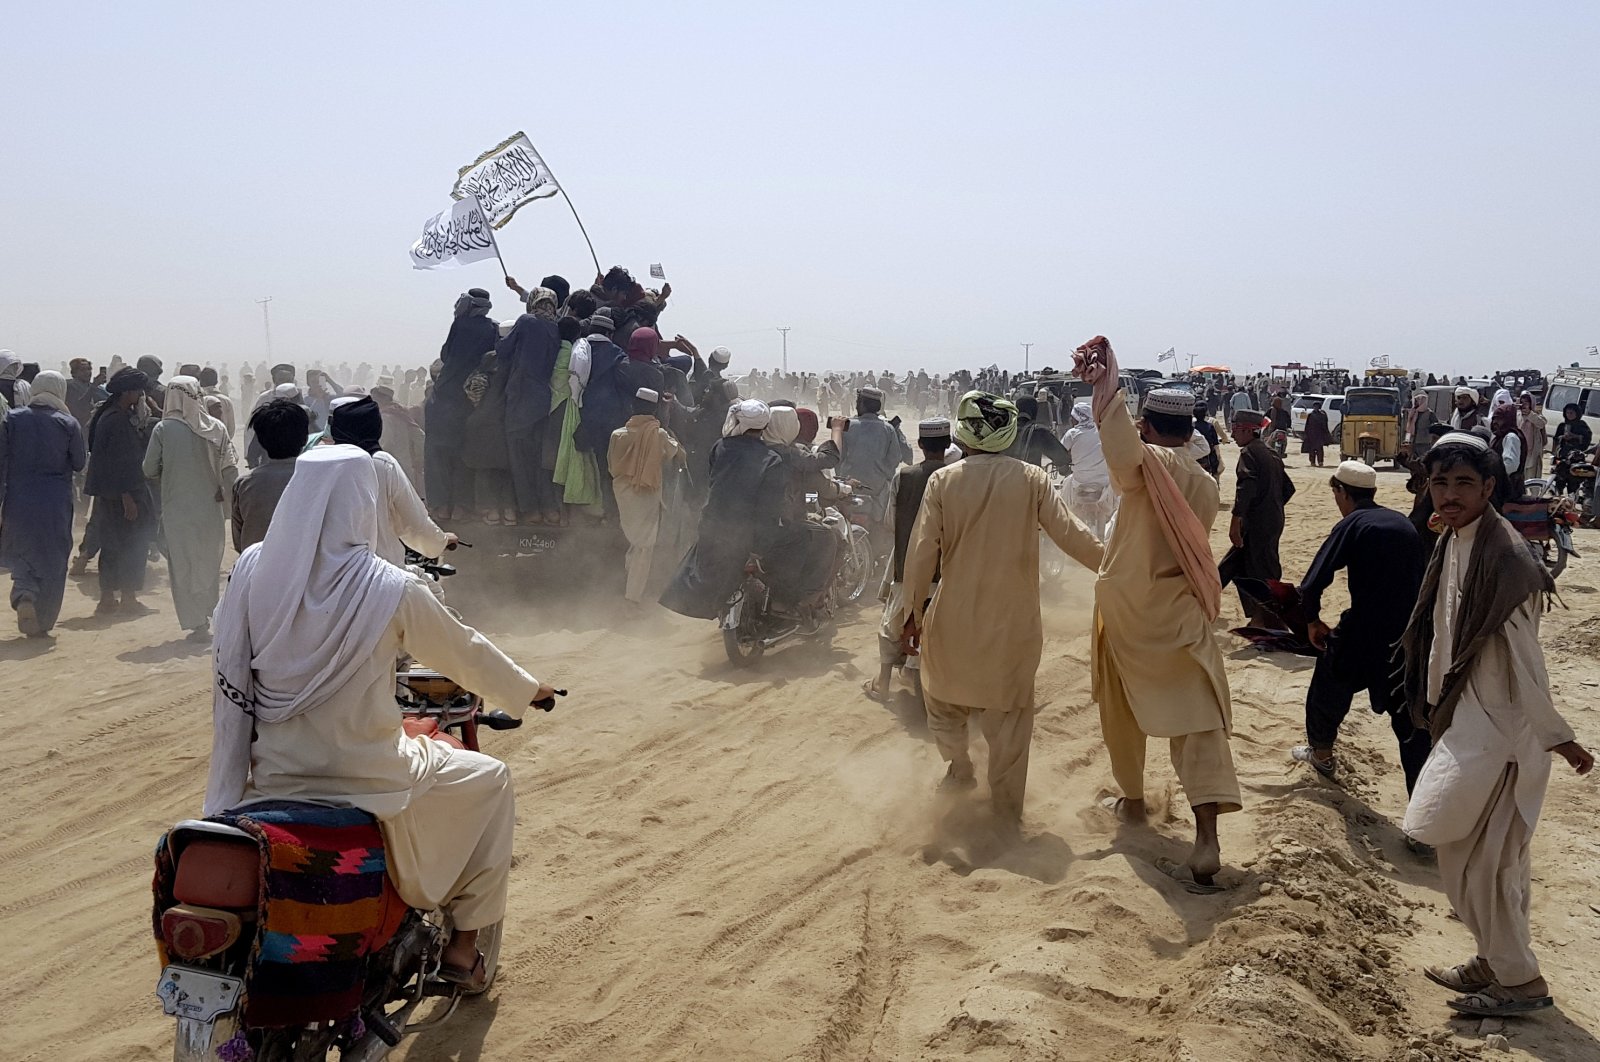 Supporters of the Taliban carry the Taliban's signature white flags in the Afghan-Pakistan border town of Chaman, Pakistan, July 14, 2021. (AP Photo)